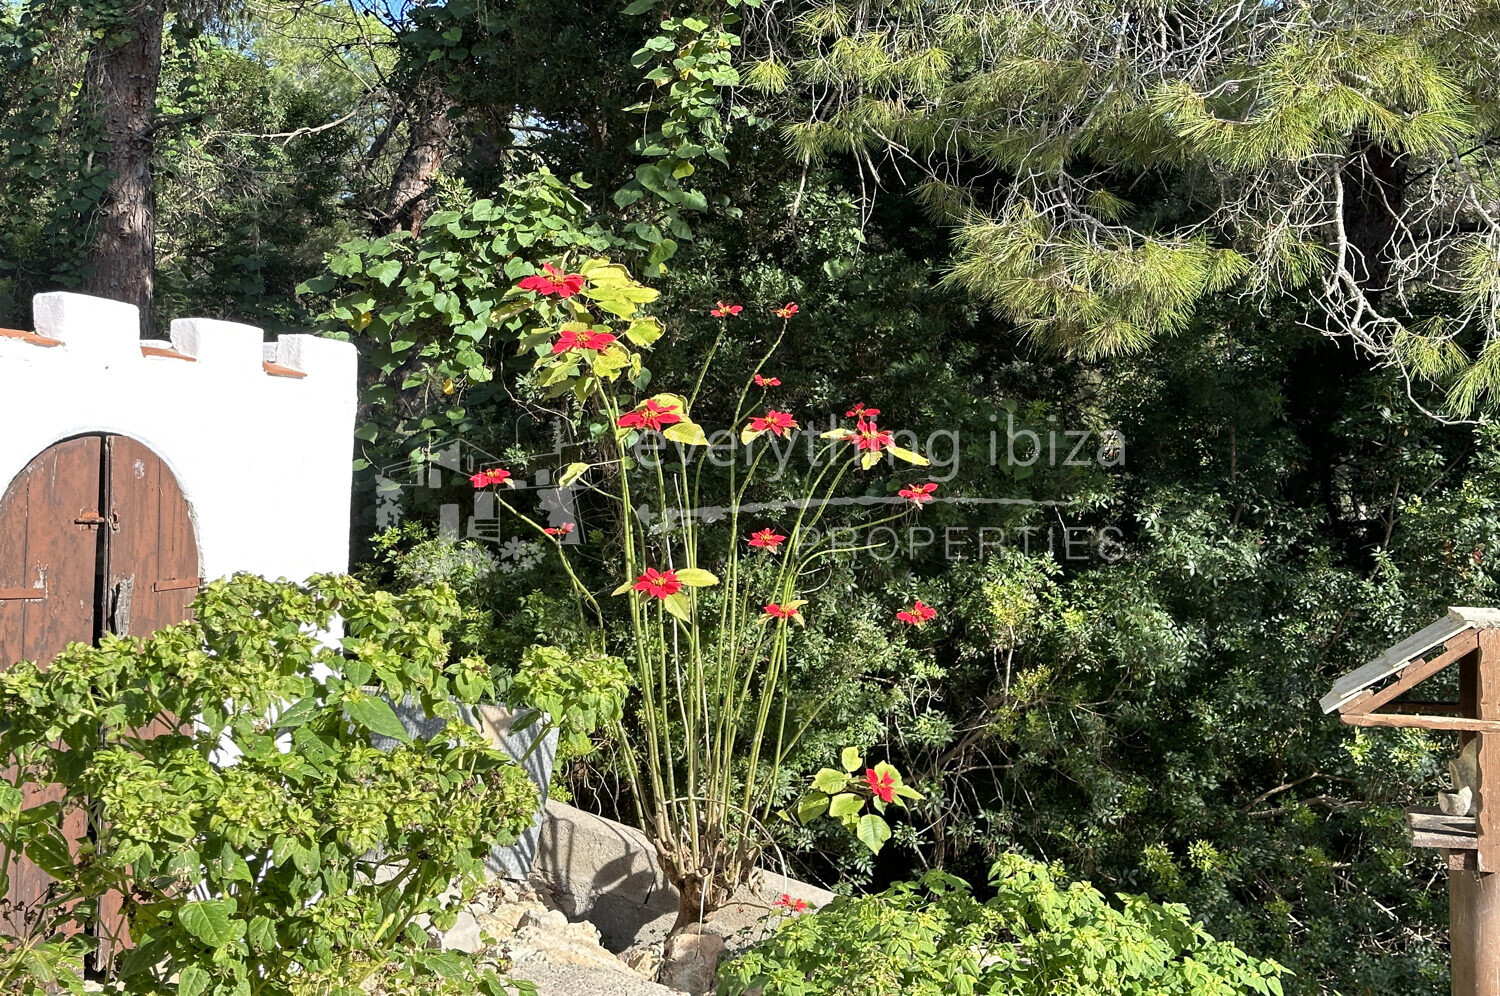 Charming Traditional Villa with Lots of Character in Cala Llonga, ref. 1520, for sale in Ibiza by everything ibiza Properties